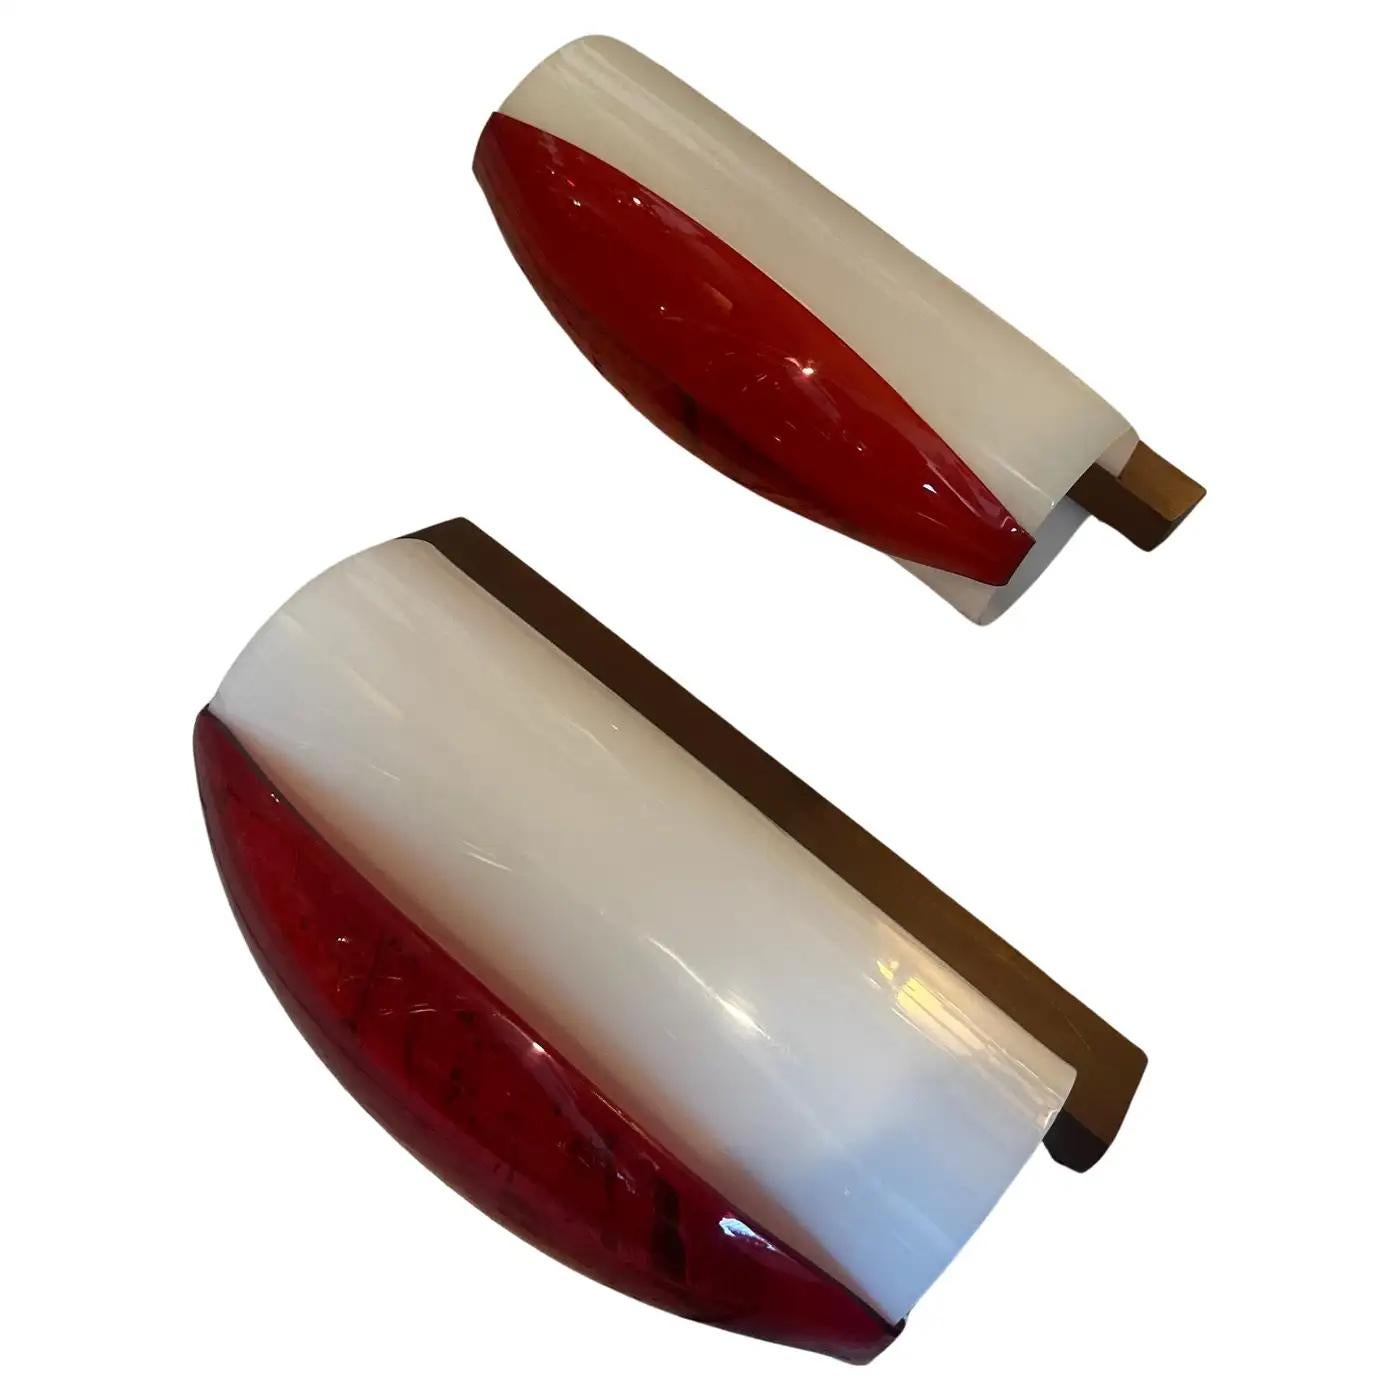 A pair of wall sconces designed and manufactured in Italy in the Sixties by Stilux, they are in perfect condition and in working order.
Mid-Century Modern design, popularized during the 1950s and 1960s, emphasizes clean lines, simplicity, and